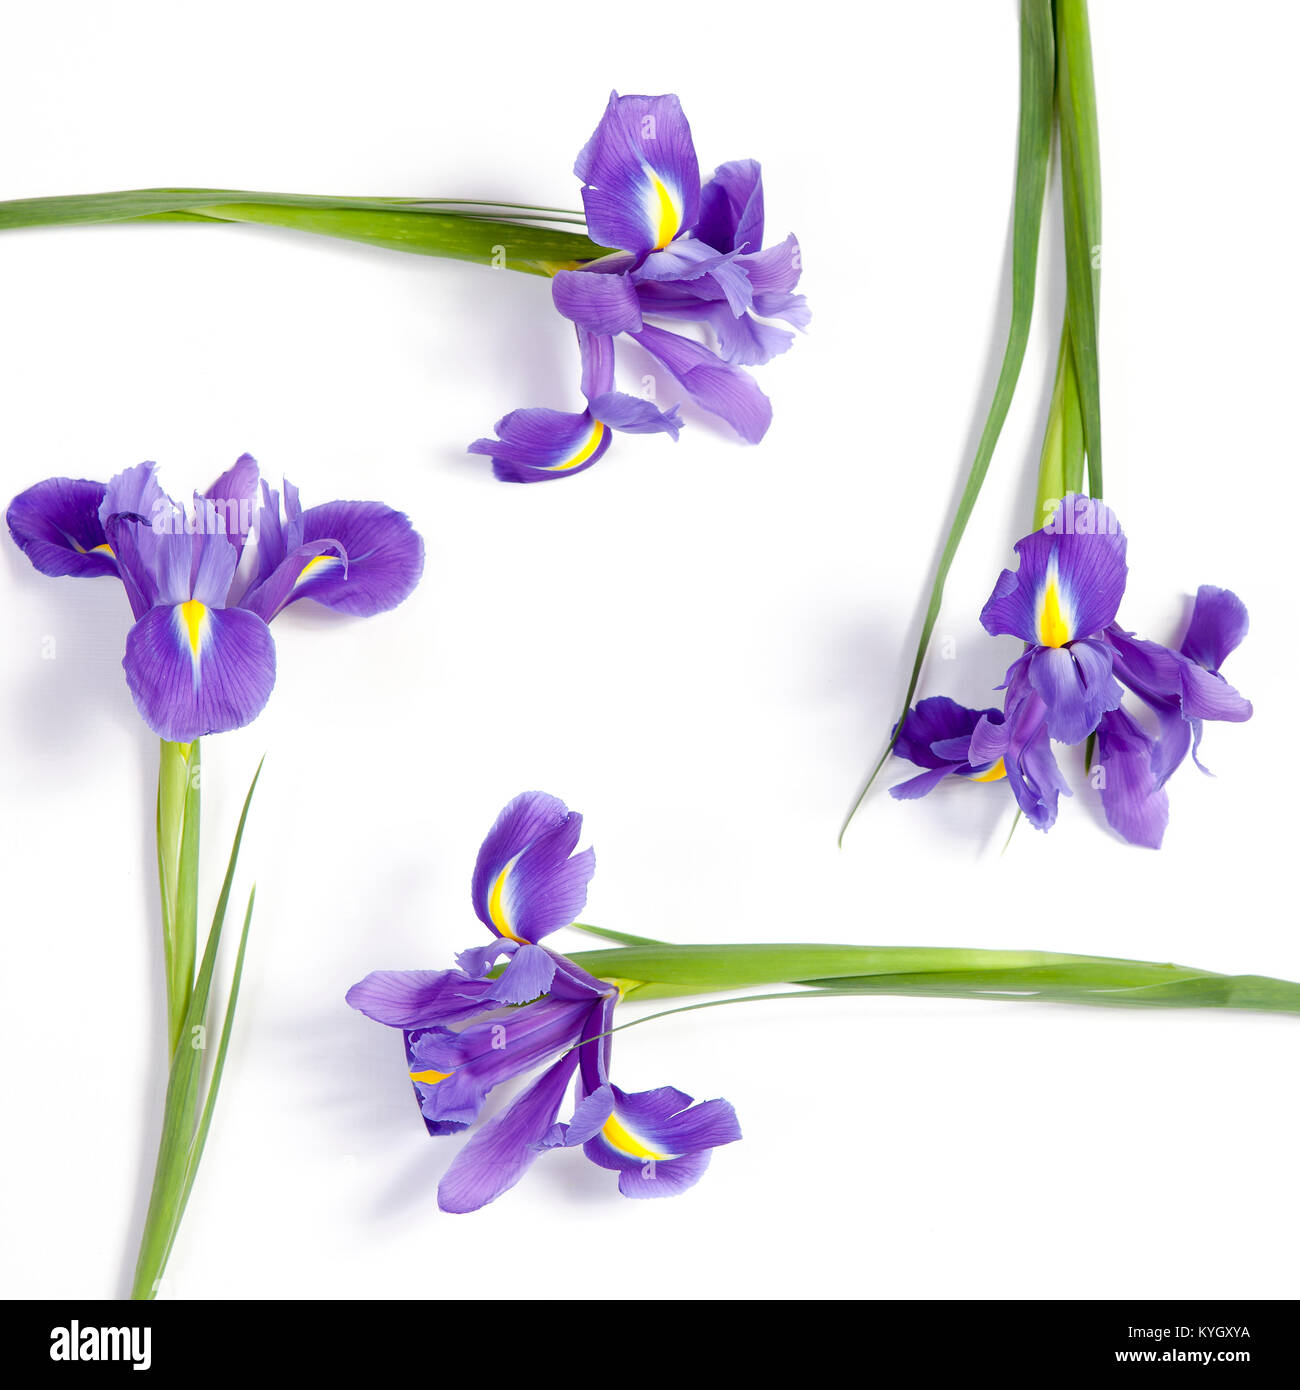 Violet Irises xiphium (Bulbous iris, sibirica) on white background with space for text. Top view, flat lay. Holiday greeting card for Valentine's Day, Stock Photo